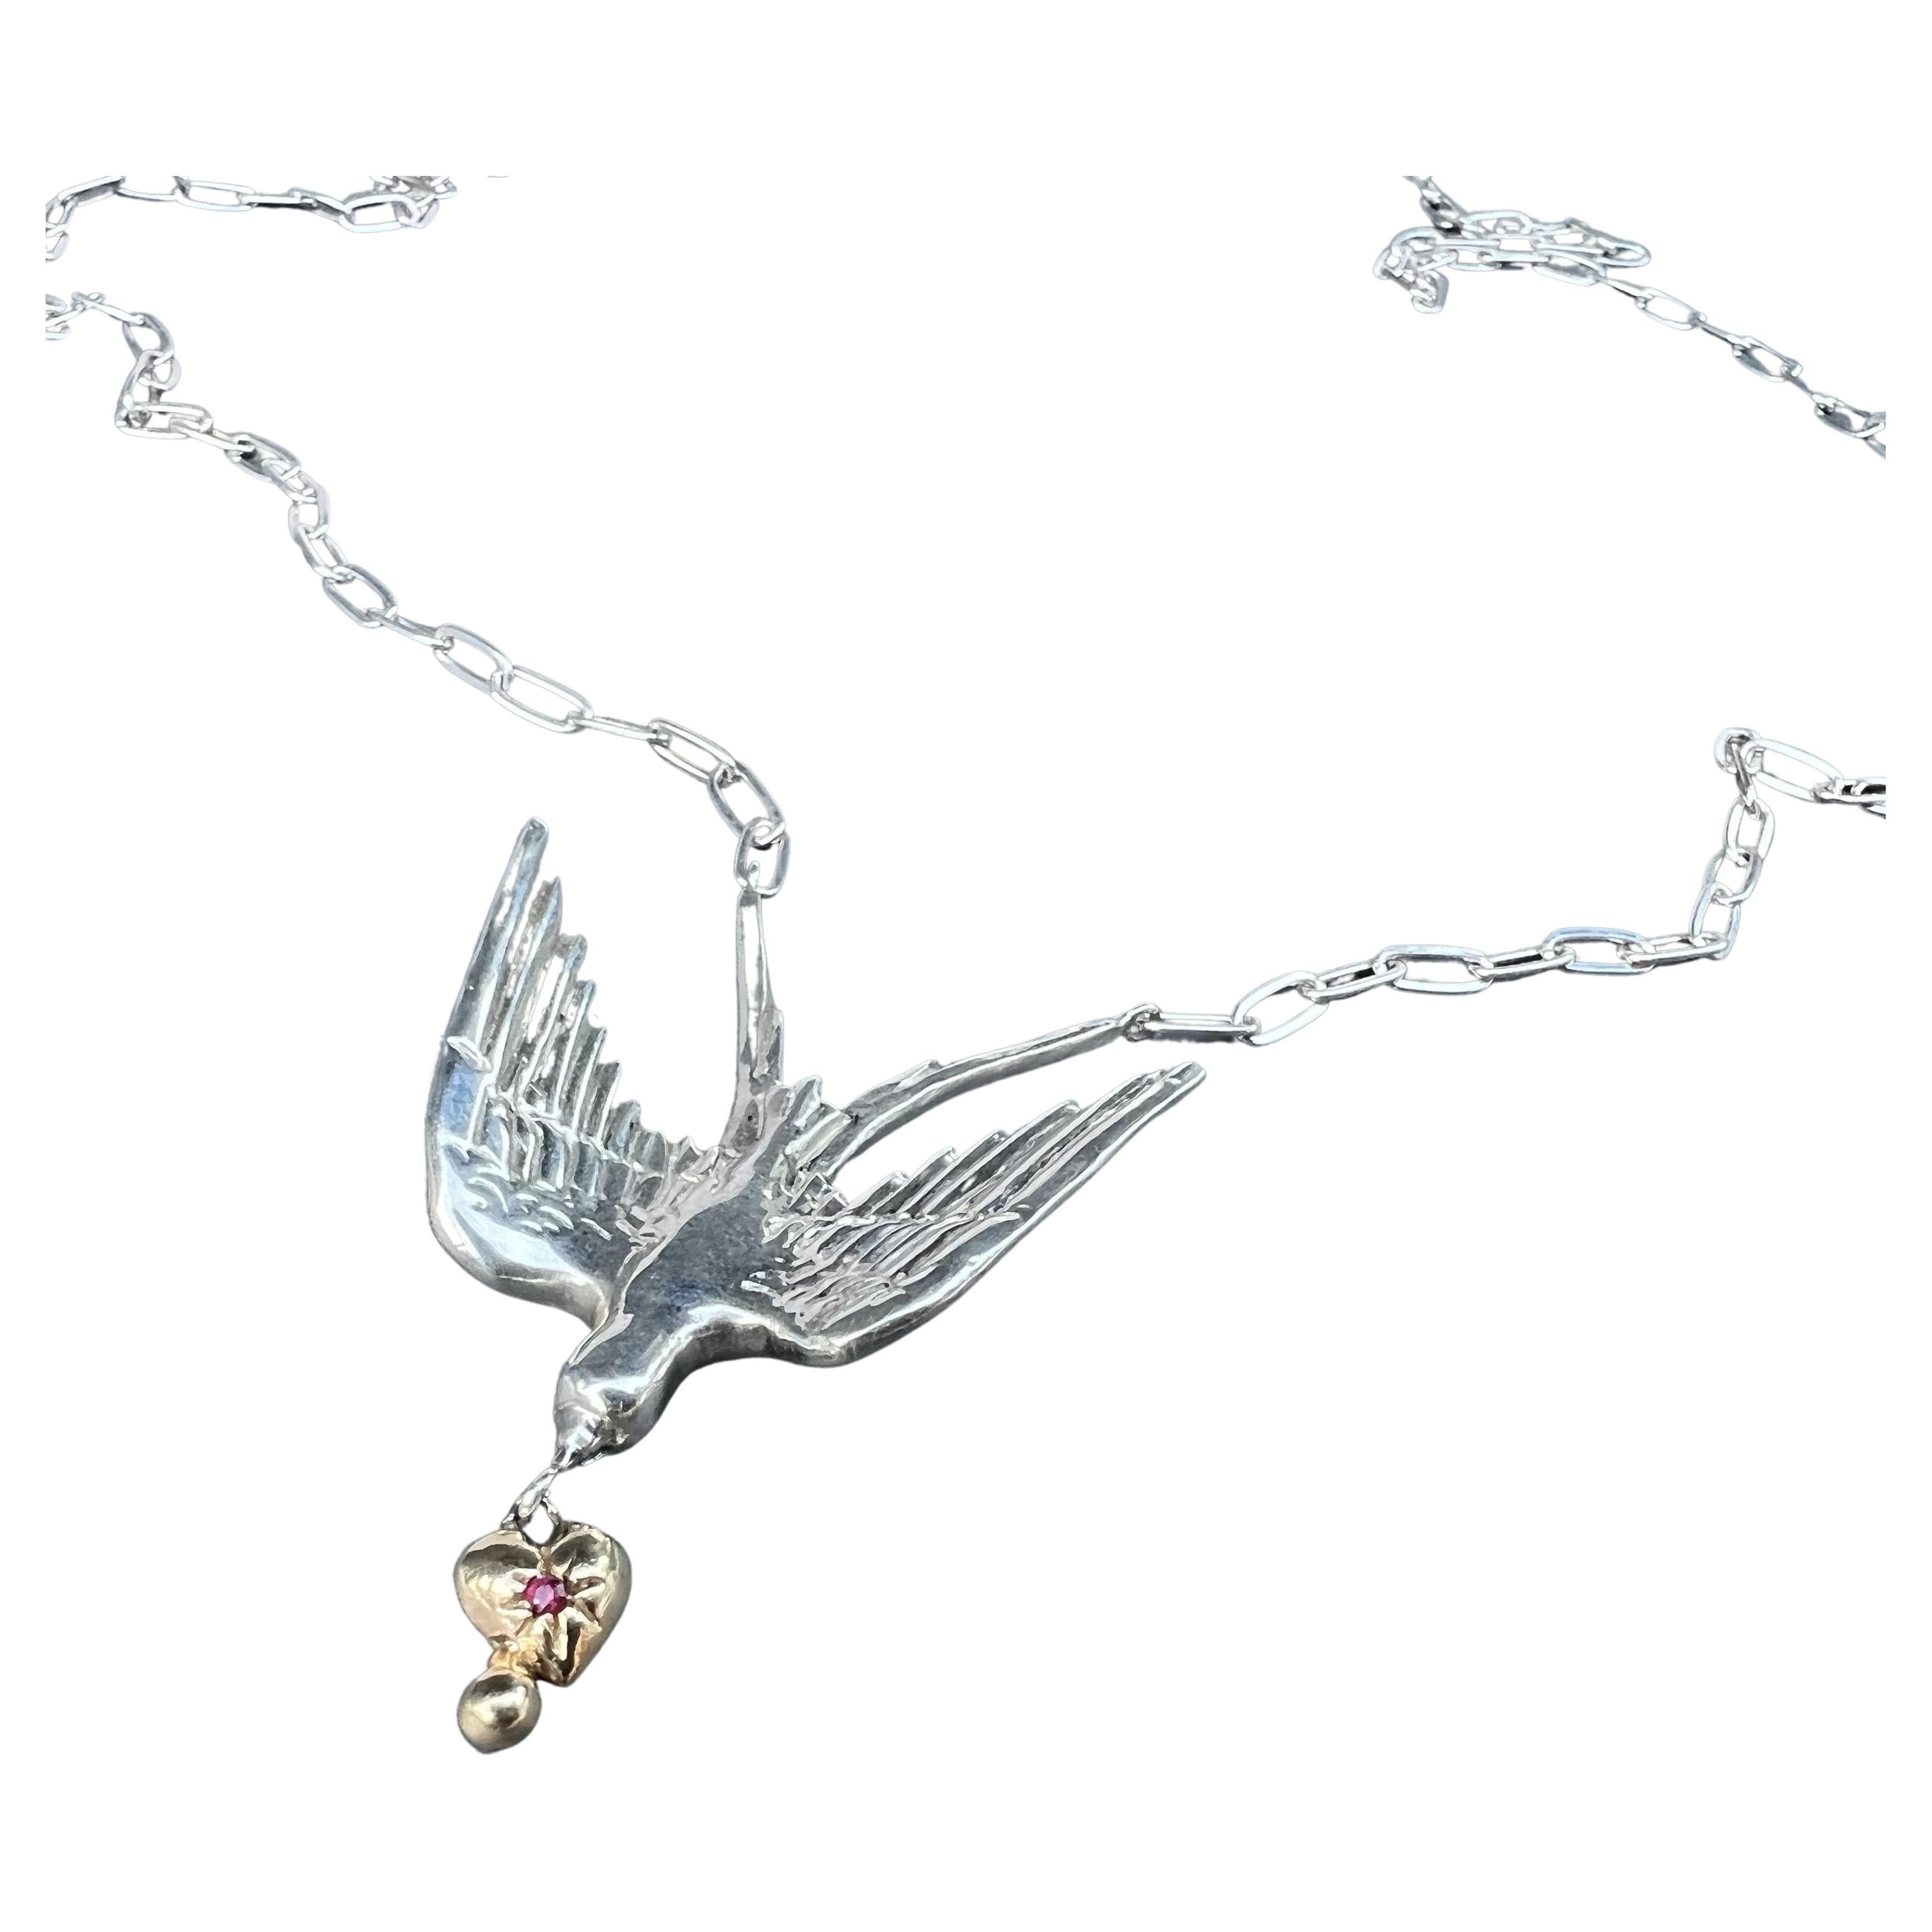 Animal jewelry Gold Heart Dove Necklace Silver Chain Ruby Victorian Style J Dauphin

The dove and heart are symbolizing Love, hope and promise together but the dove also represents peace of the deepest kind. It soothes and quiets our worried or